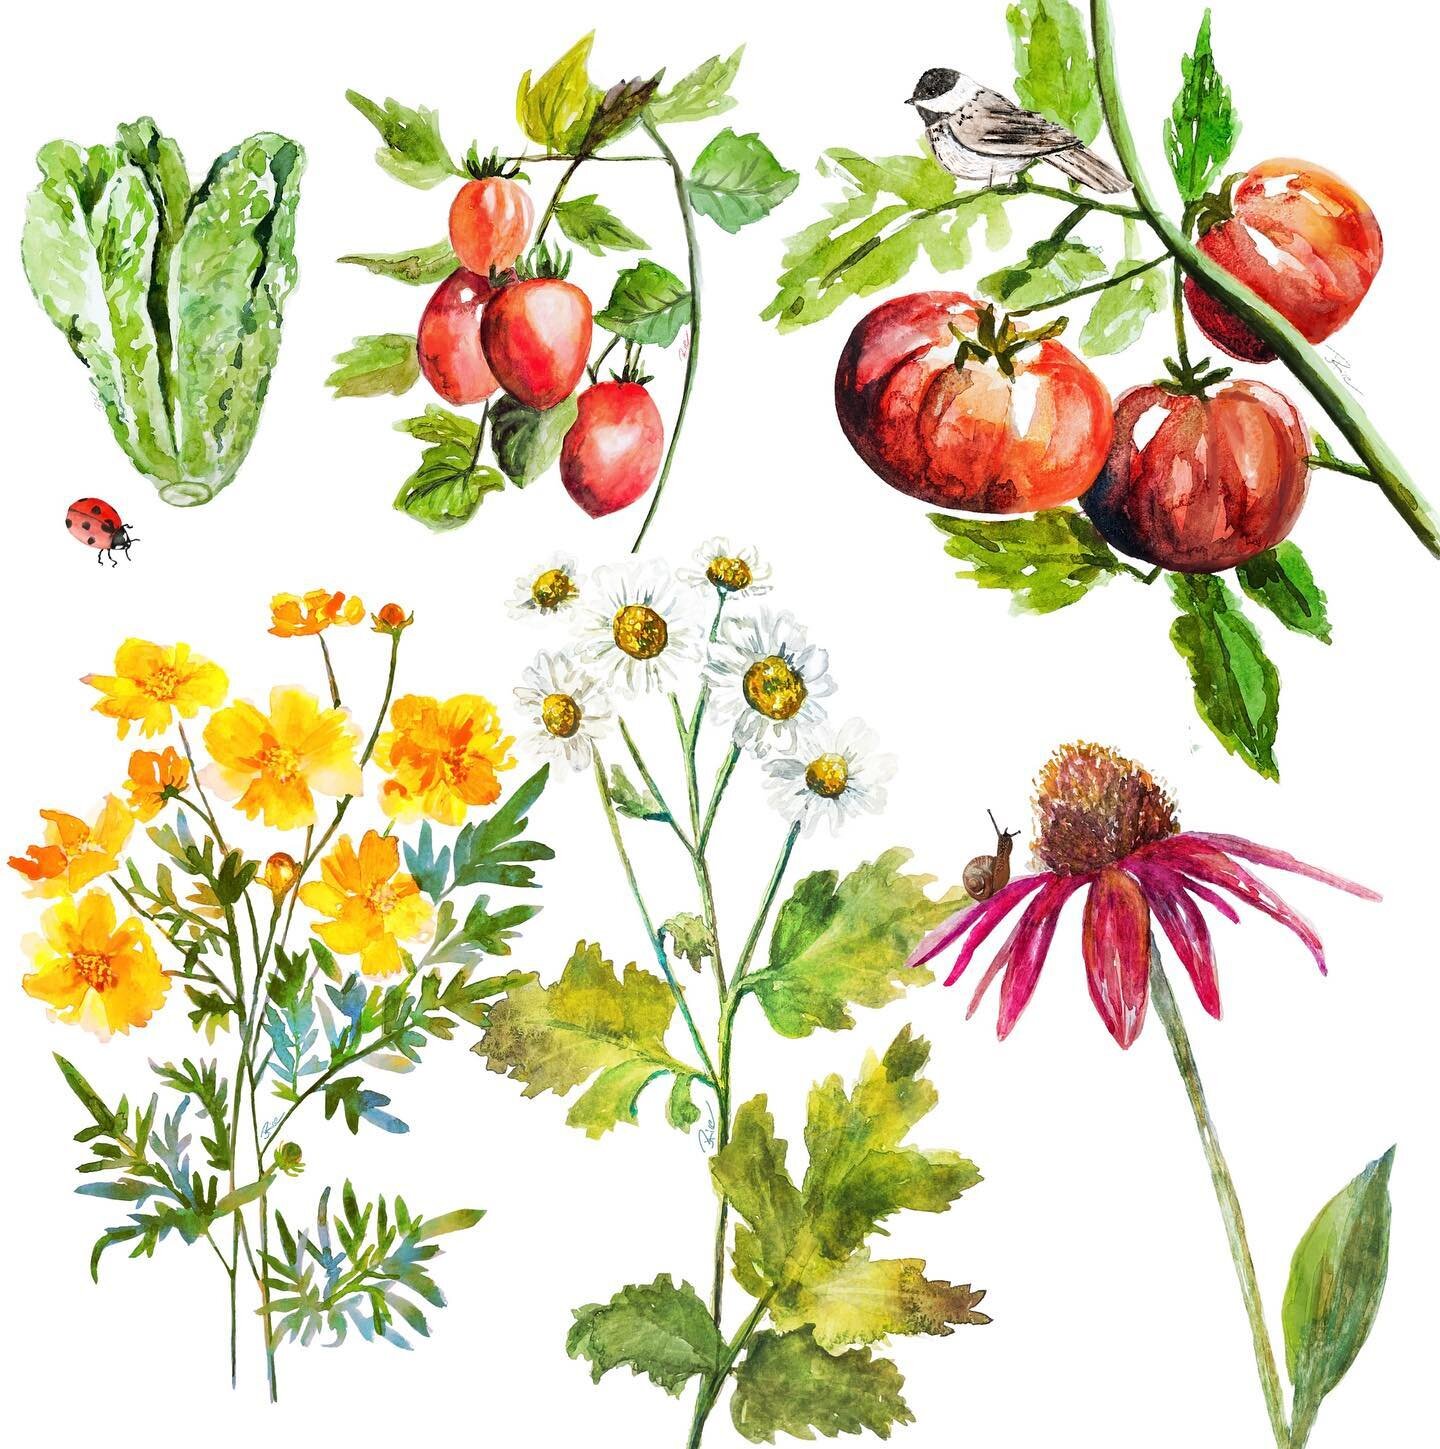 I have over 50 different plants in my garden and I decided I want to paint each kind&hellip;I have a bit to go I think
#garden #watercolorillustration #gardendesign #gardenillustration #feverfew #cosmos #tomato #echinacea